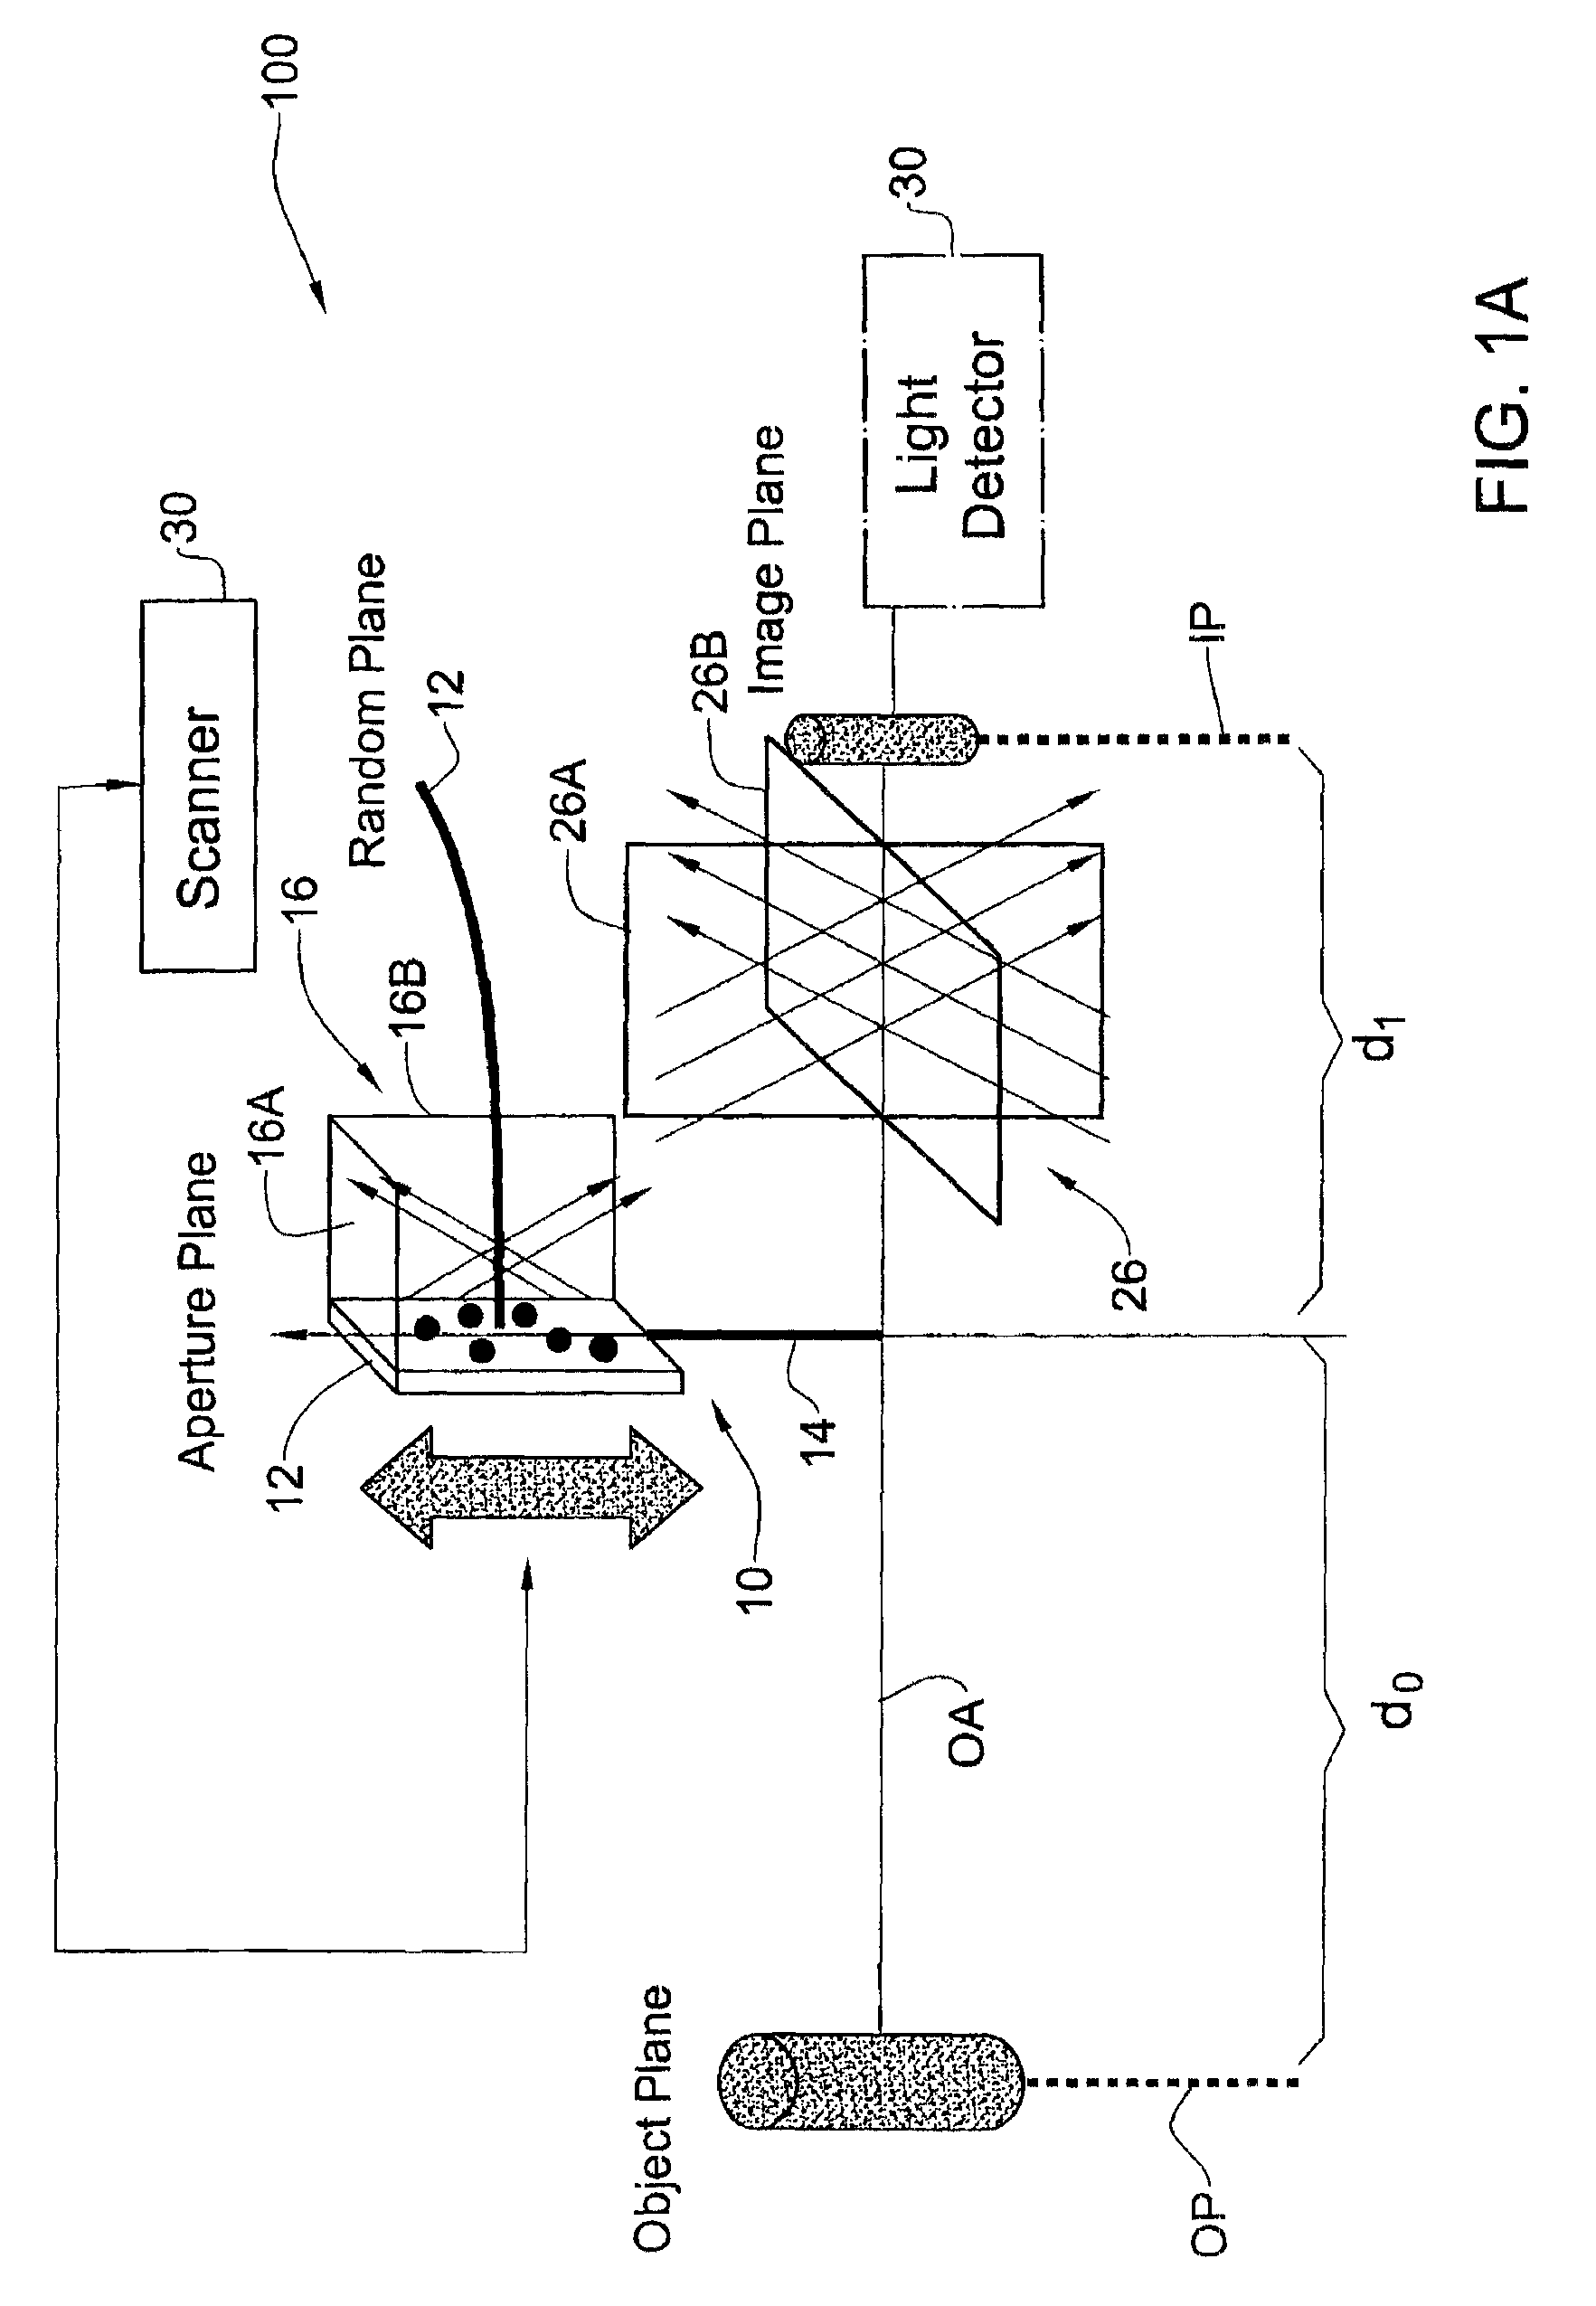 System and method for imaging with extended depth of focus and incoherent light